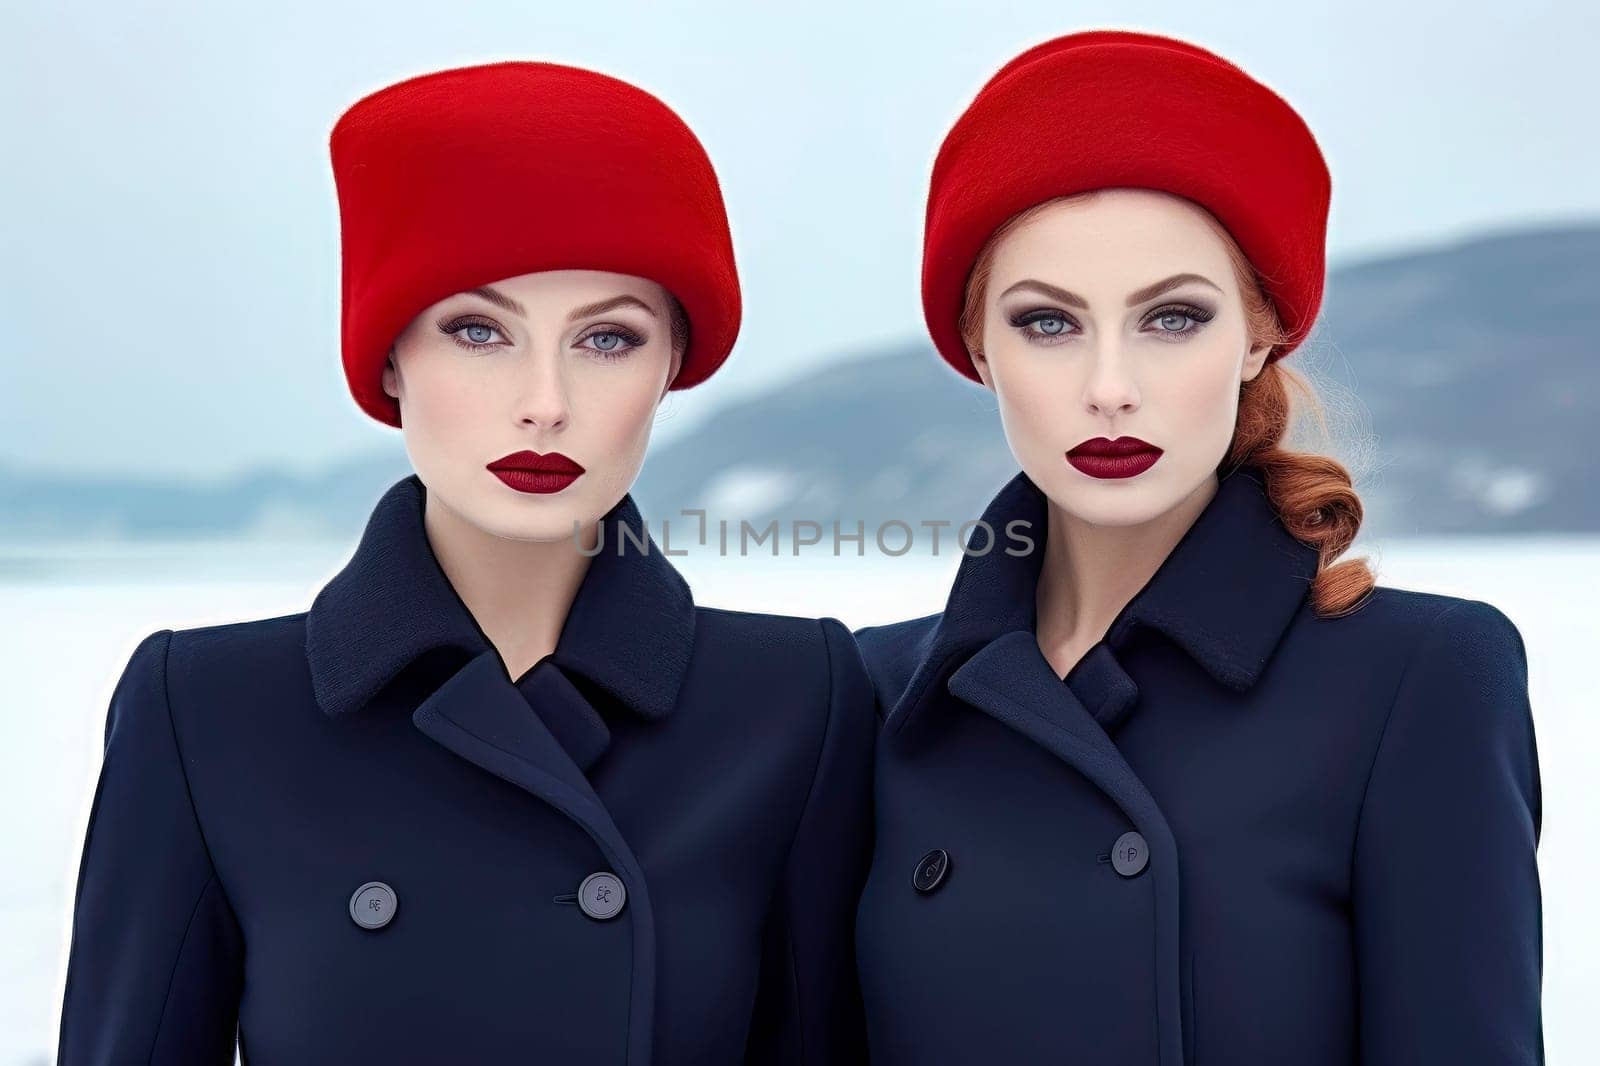 Russian Twin Girls Red Hats by pippocarlot